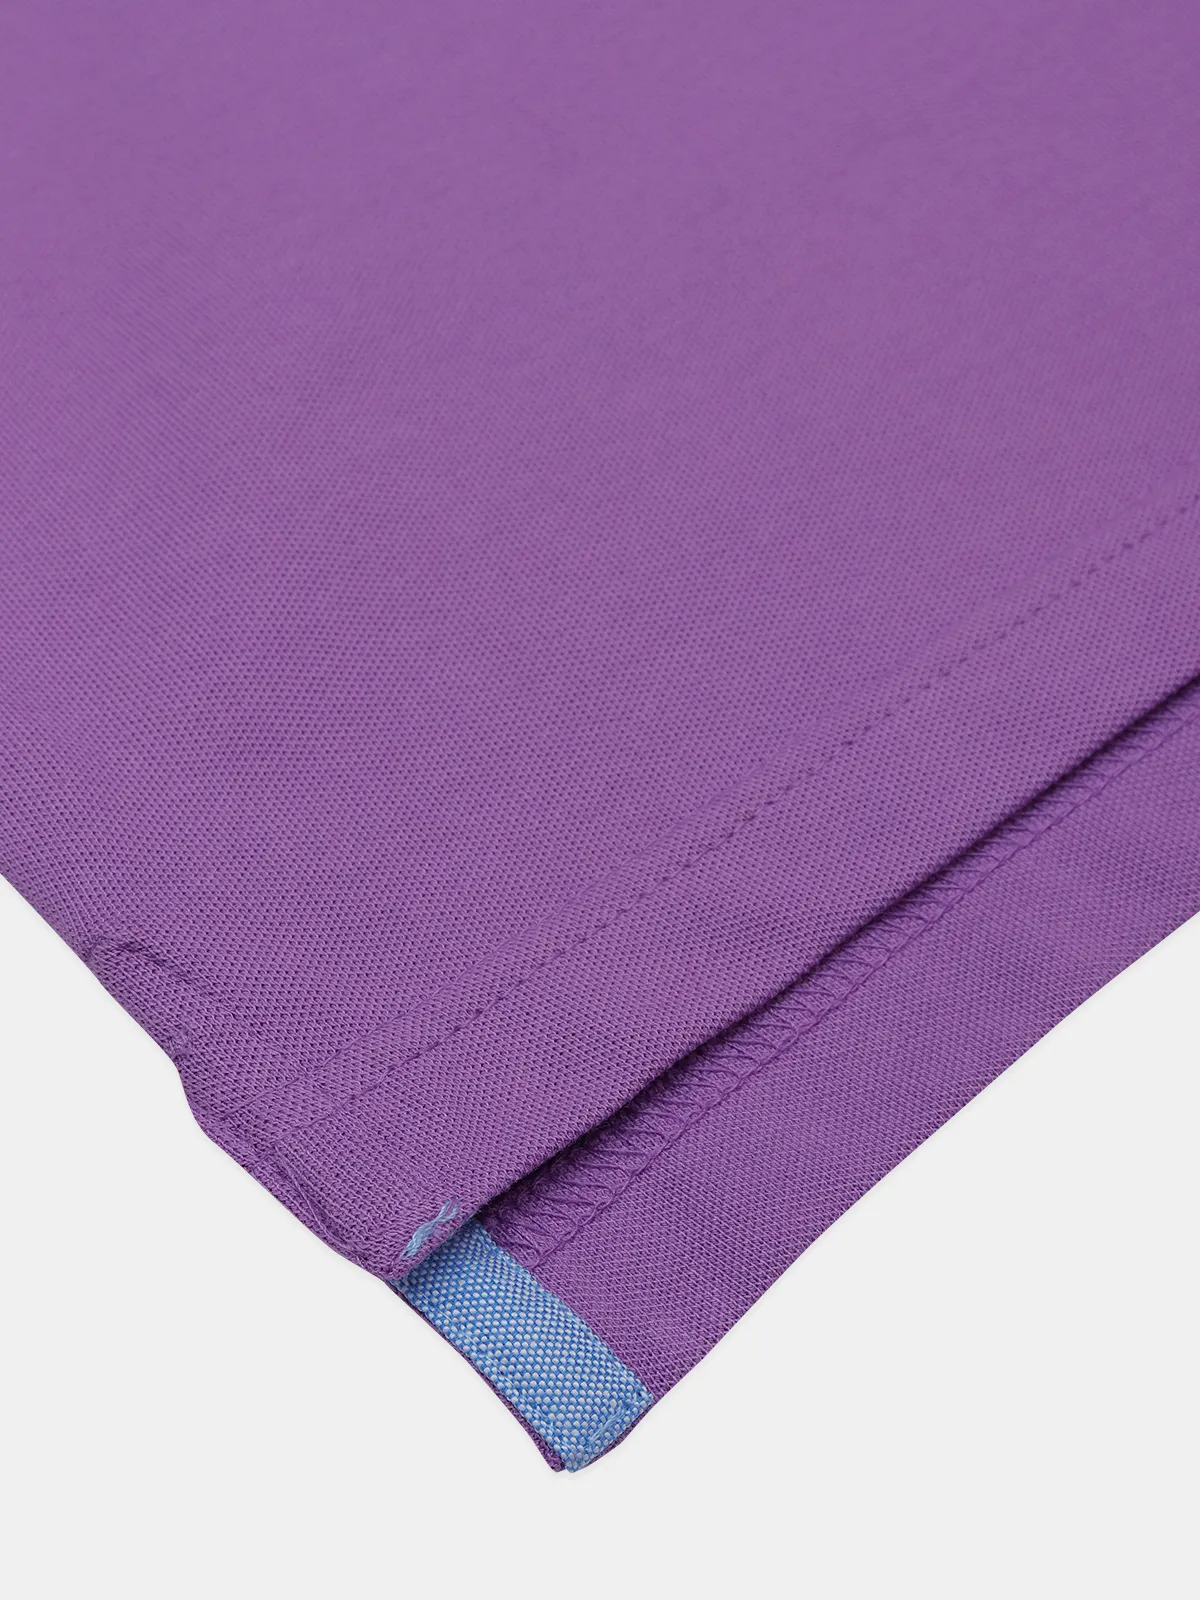 Dragon Hill solid purple t shirt in cotton